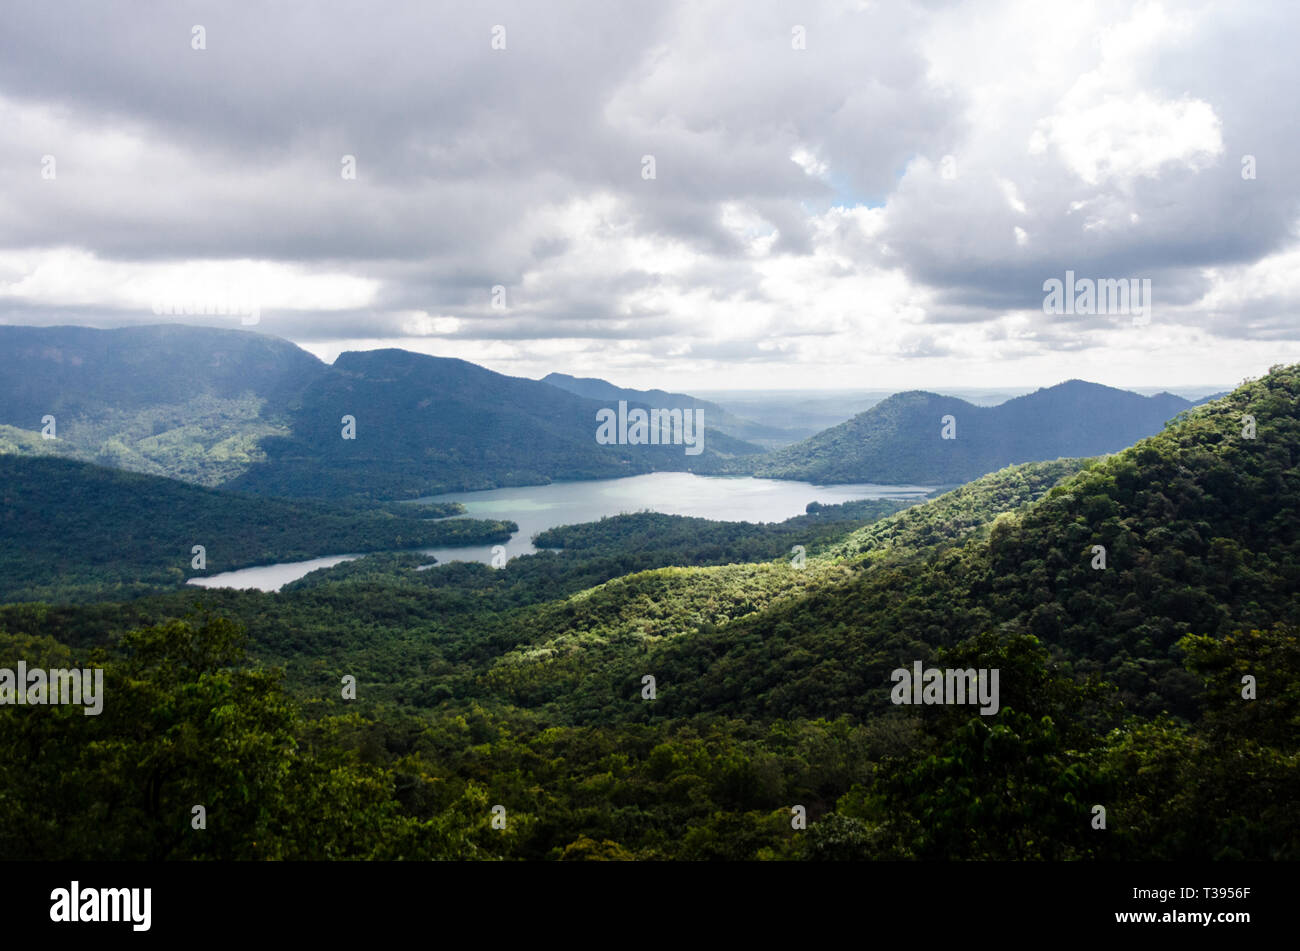 View of Anjunem Dam Reservoir from Chorla Ghat Viewpoint in Goa, India. Chorla ghat is a scenic road that connects Goa to Belagavi (Belgaum). Stock Photo